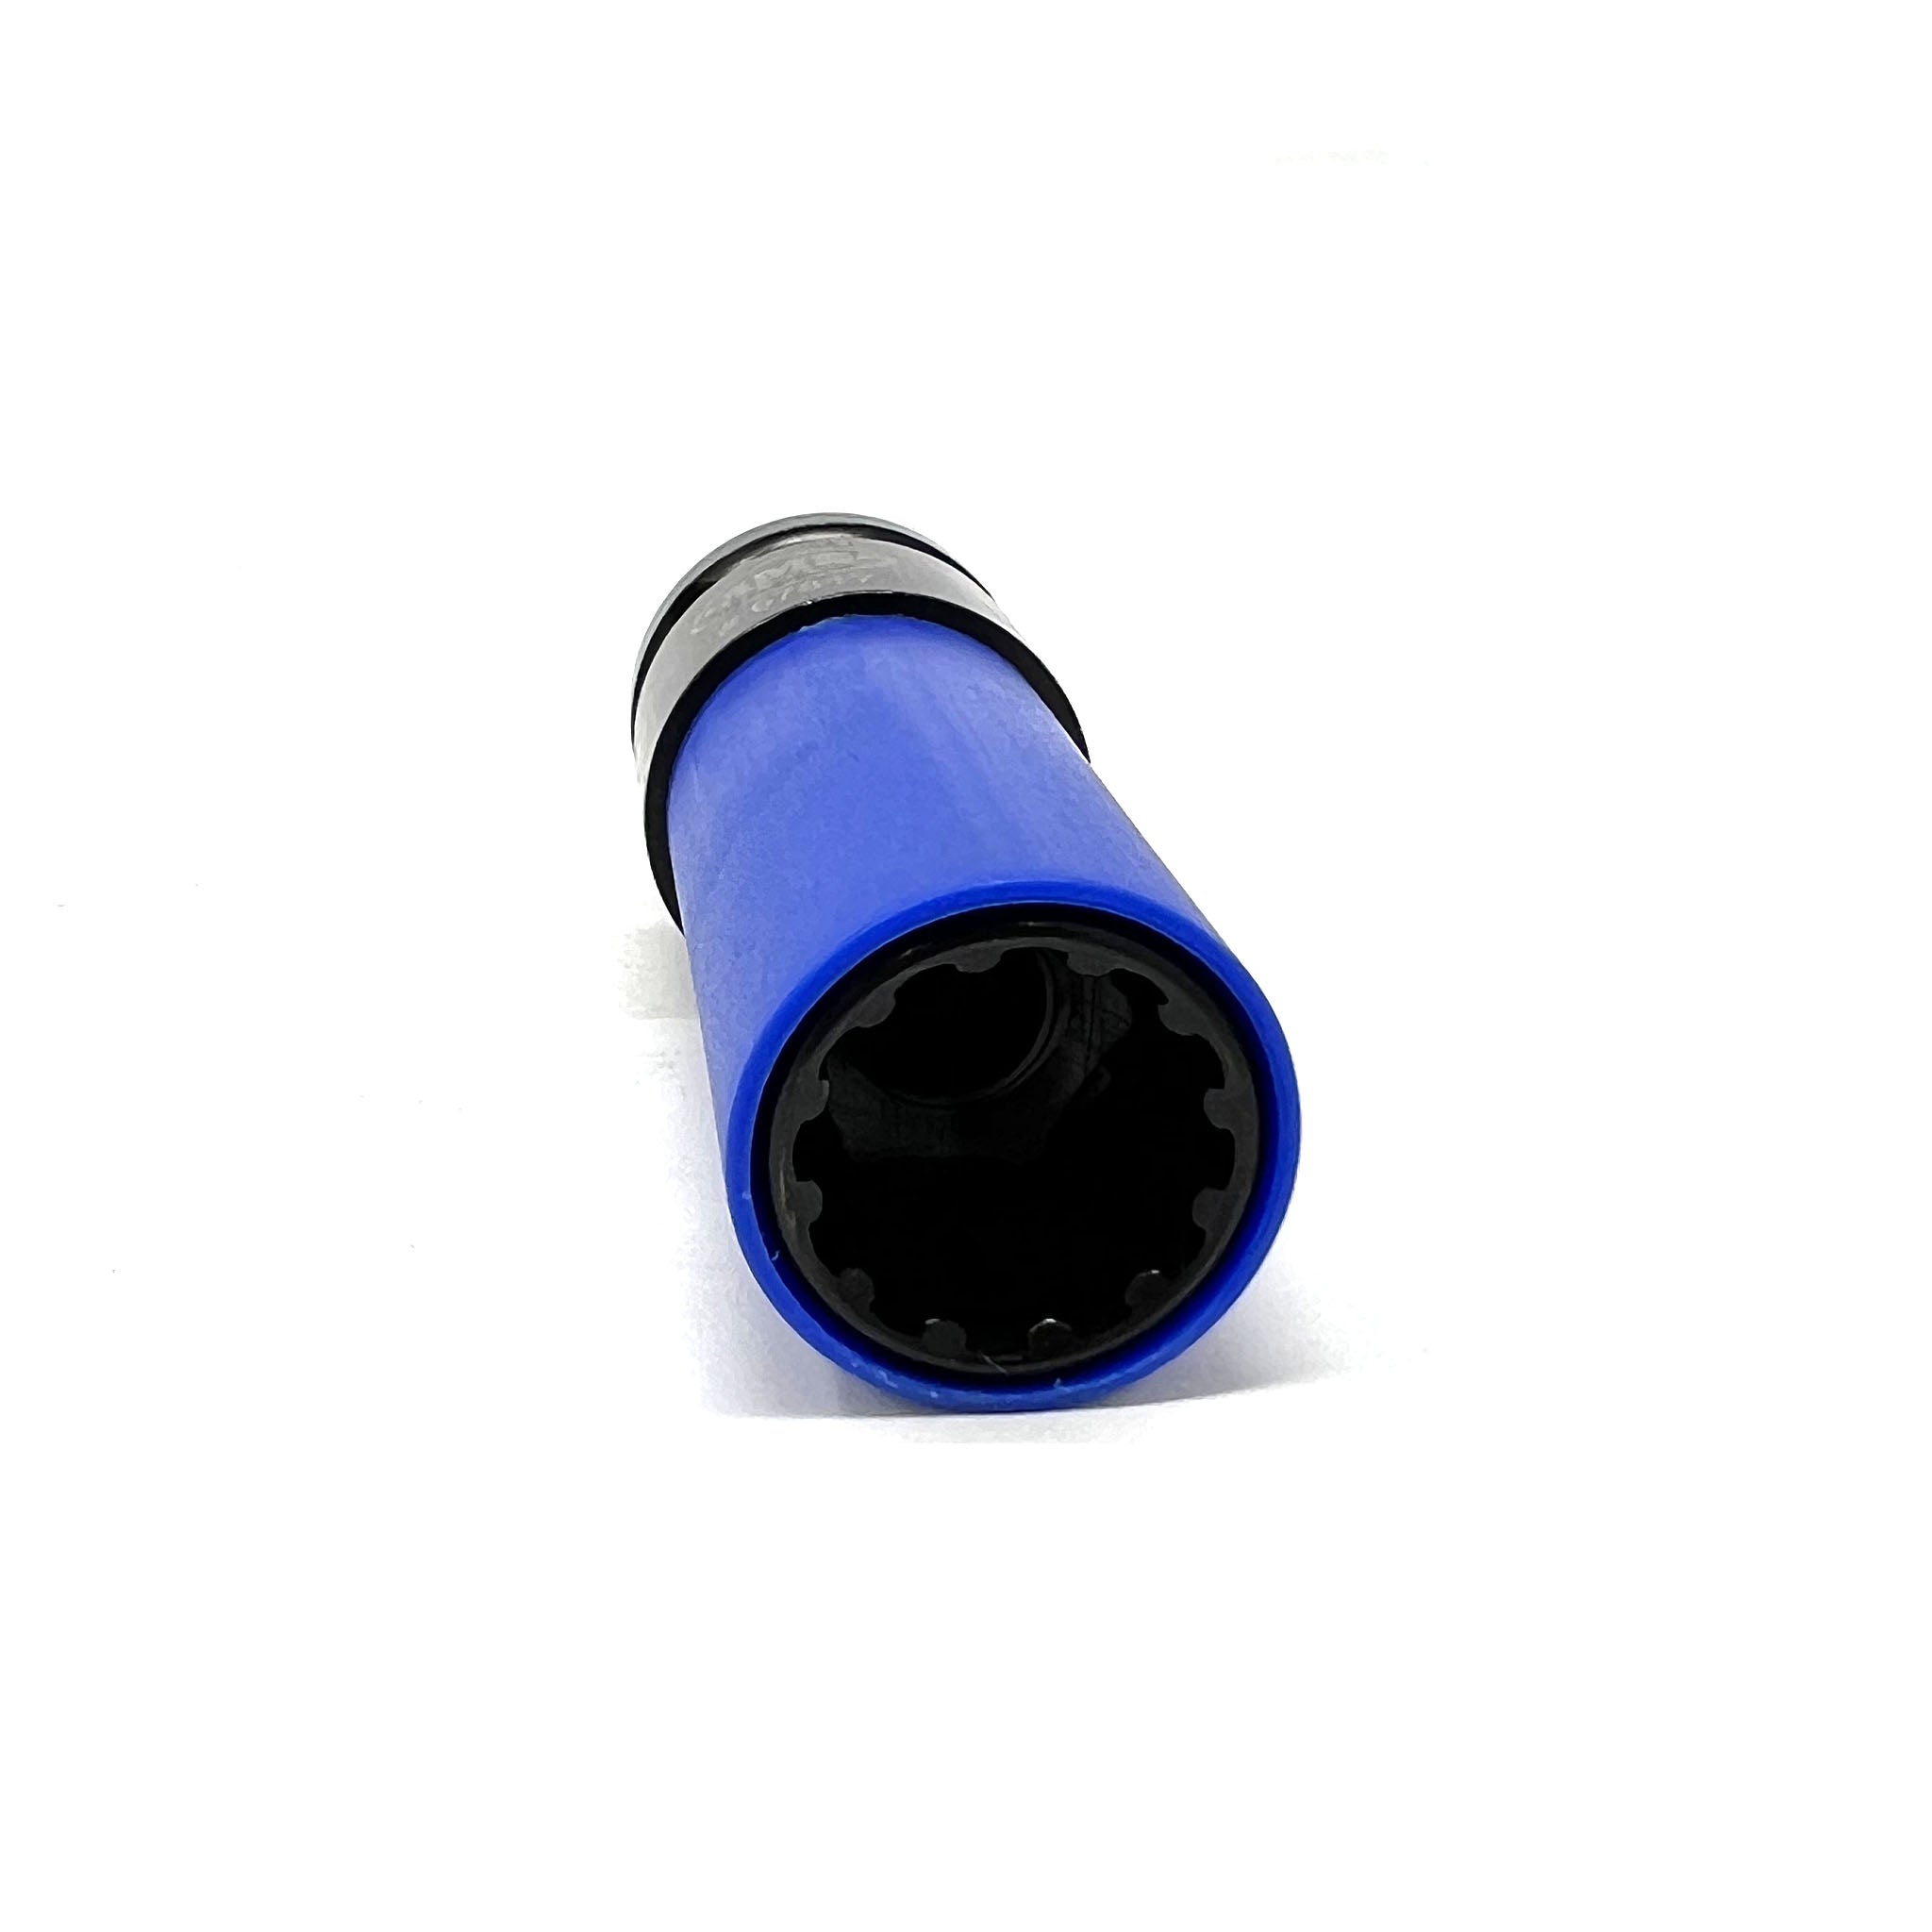 1/2in Dr. 17MM Spline Impact Socket with Sleeve